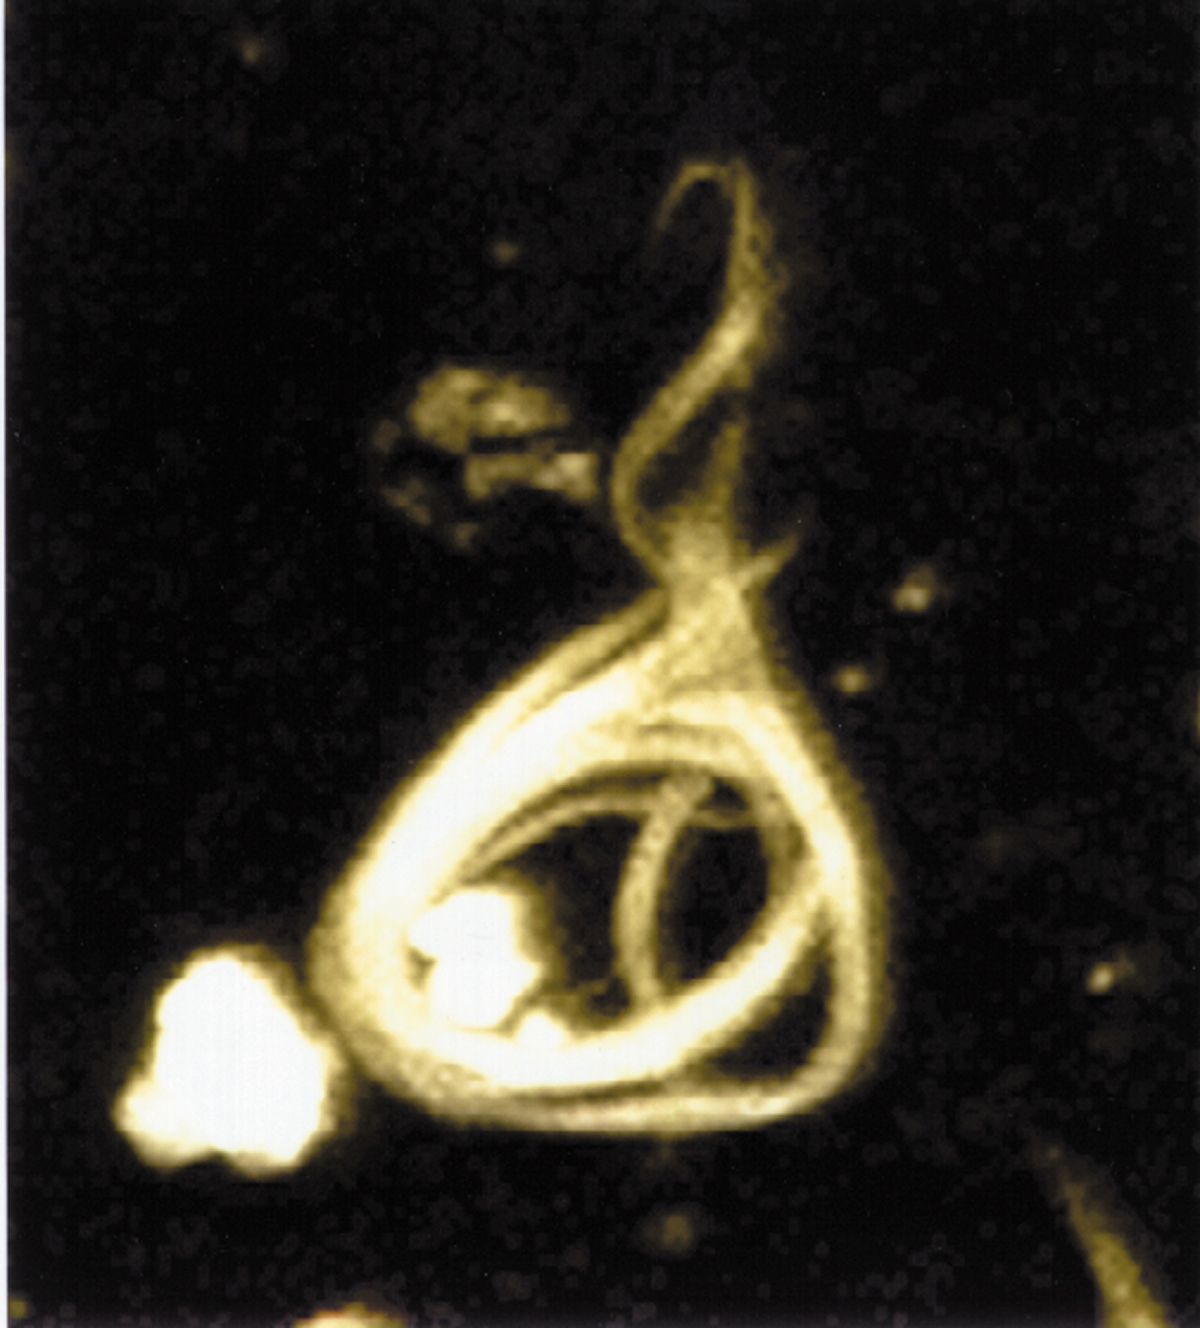 Microscopy image of a neurofibrillary tangle, conformed by hyperphosphorylated tau protein.